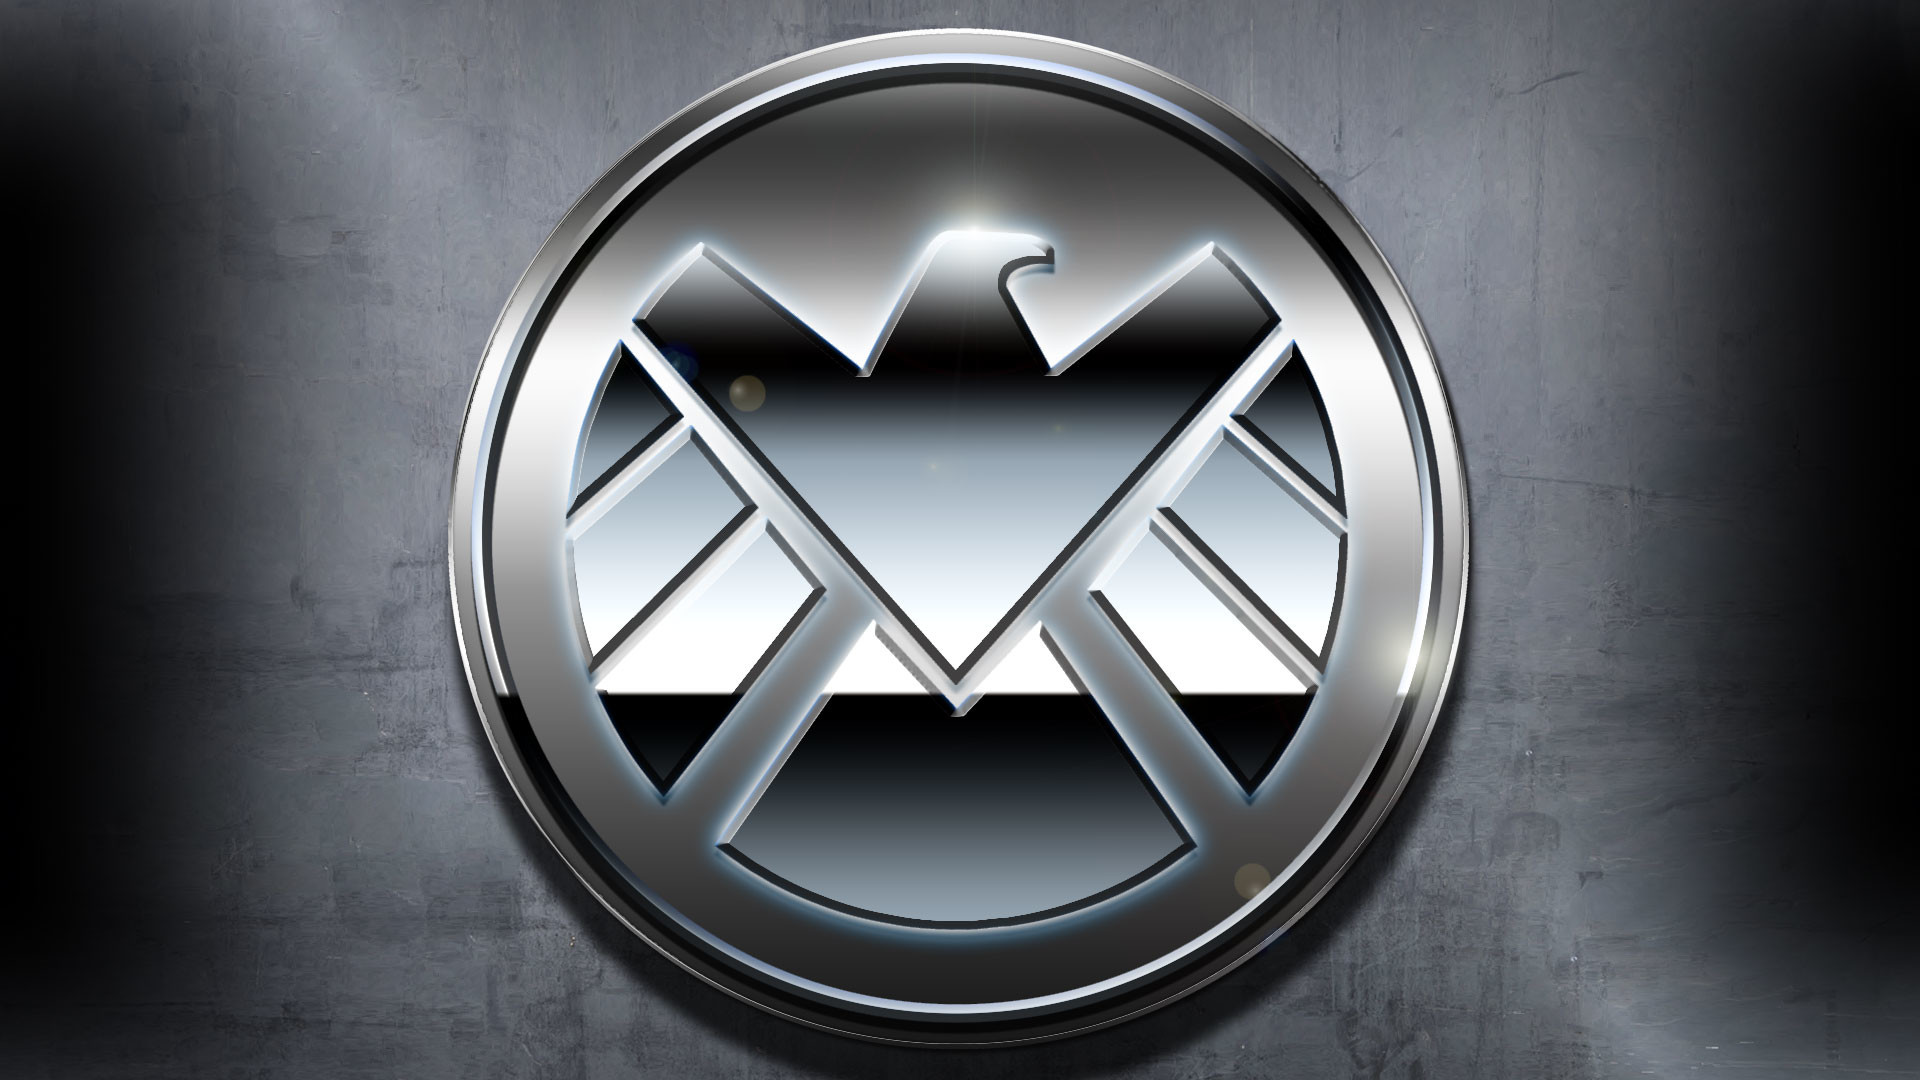 agents of shield logo wallpaper | Top HQ Wallpapers